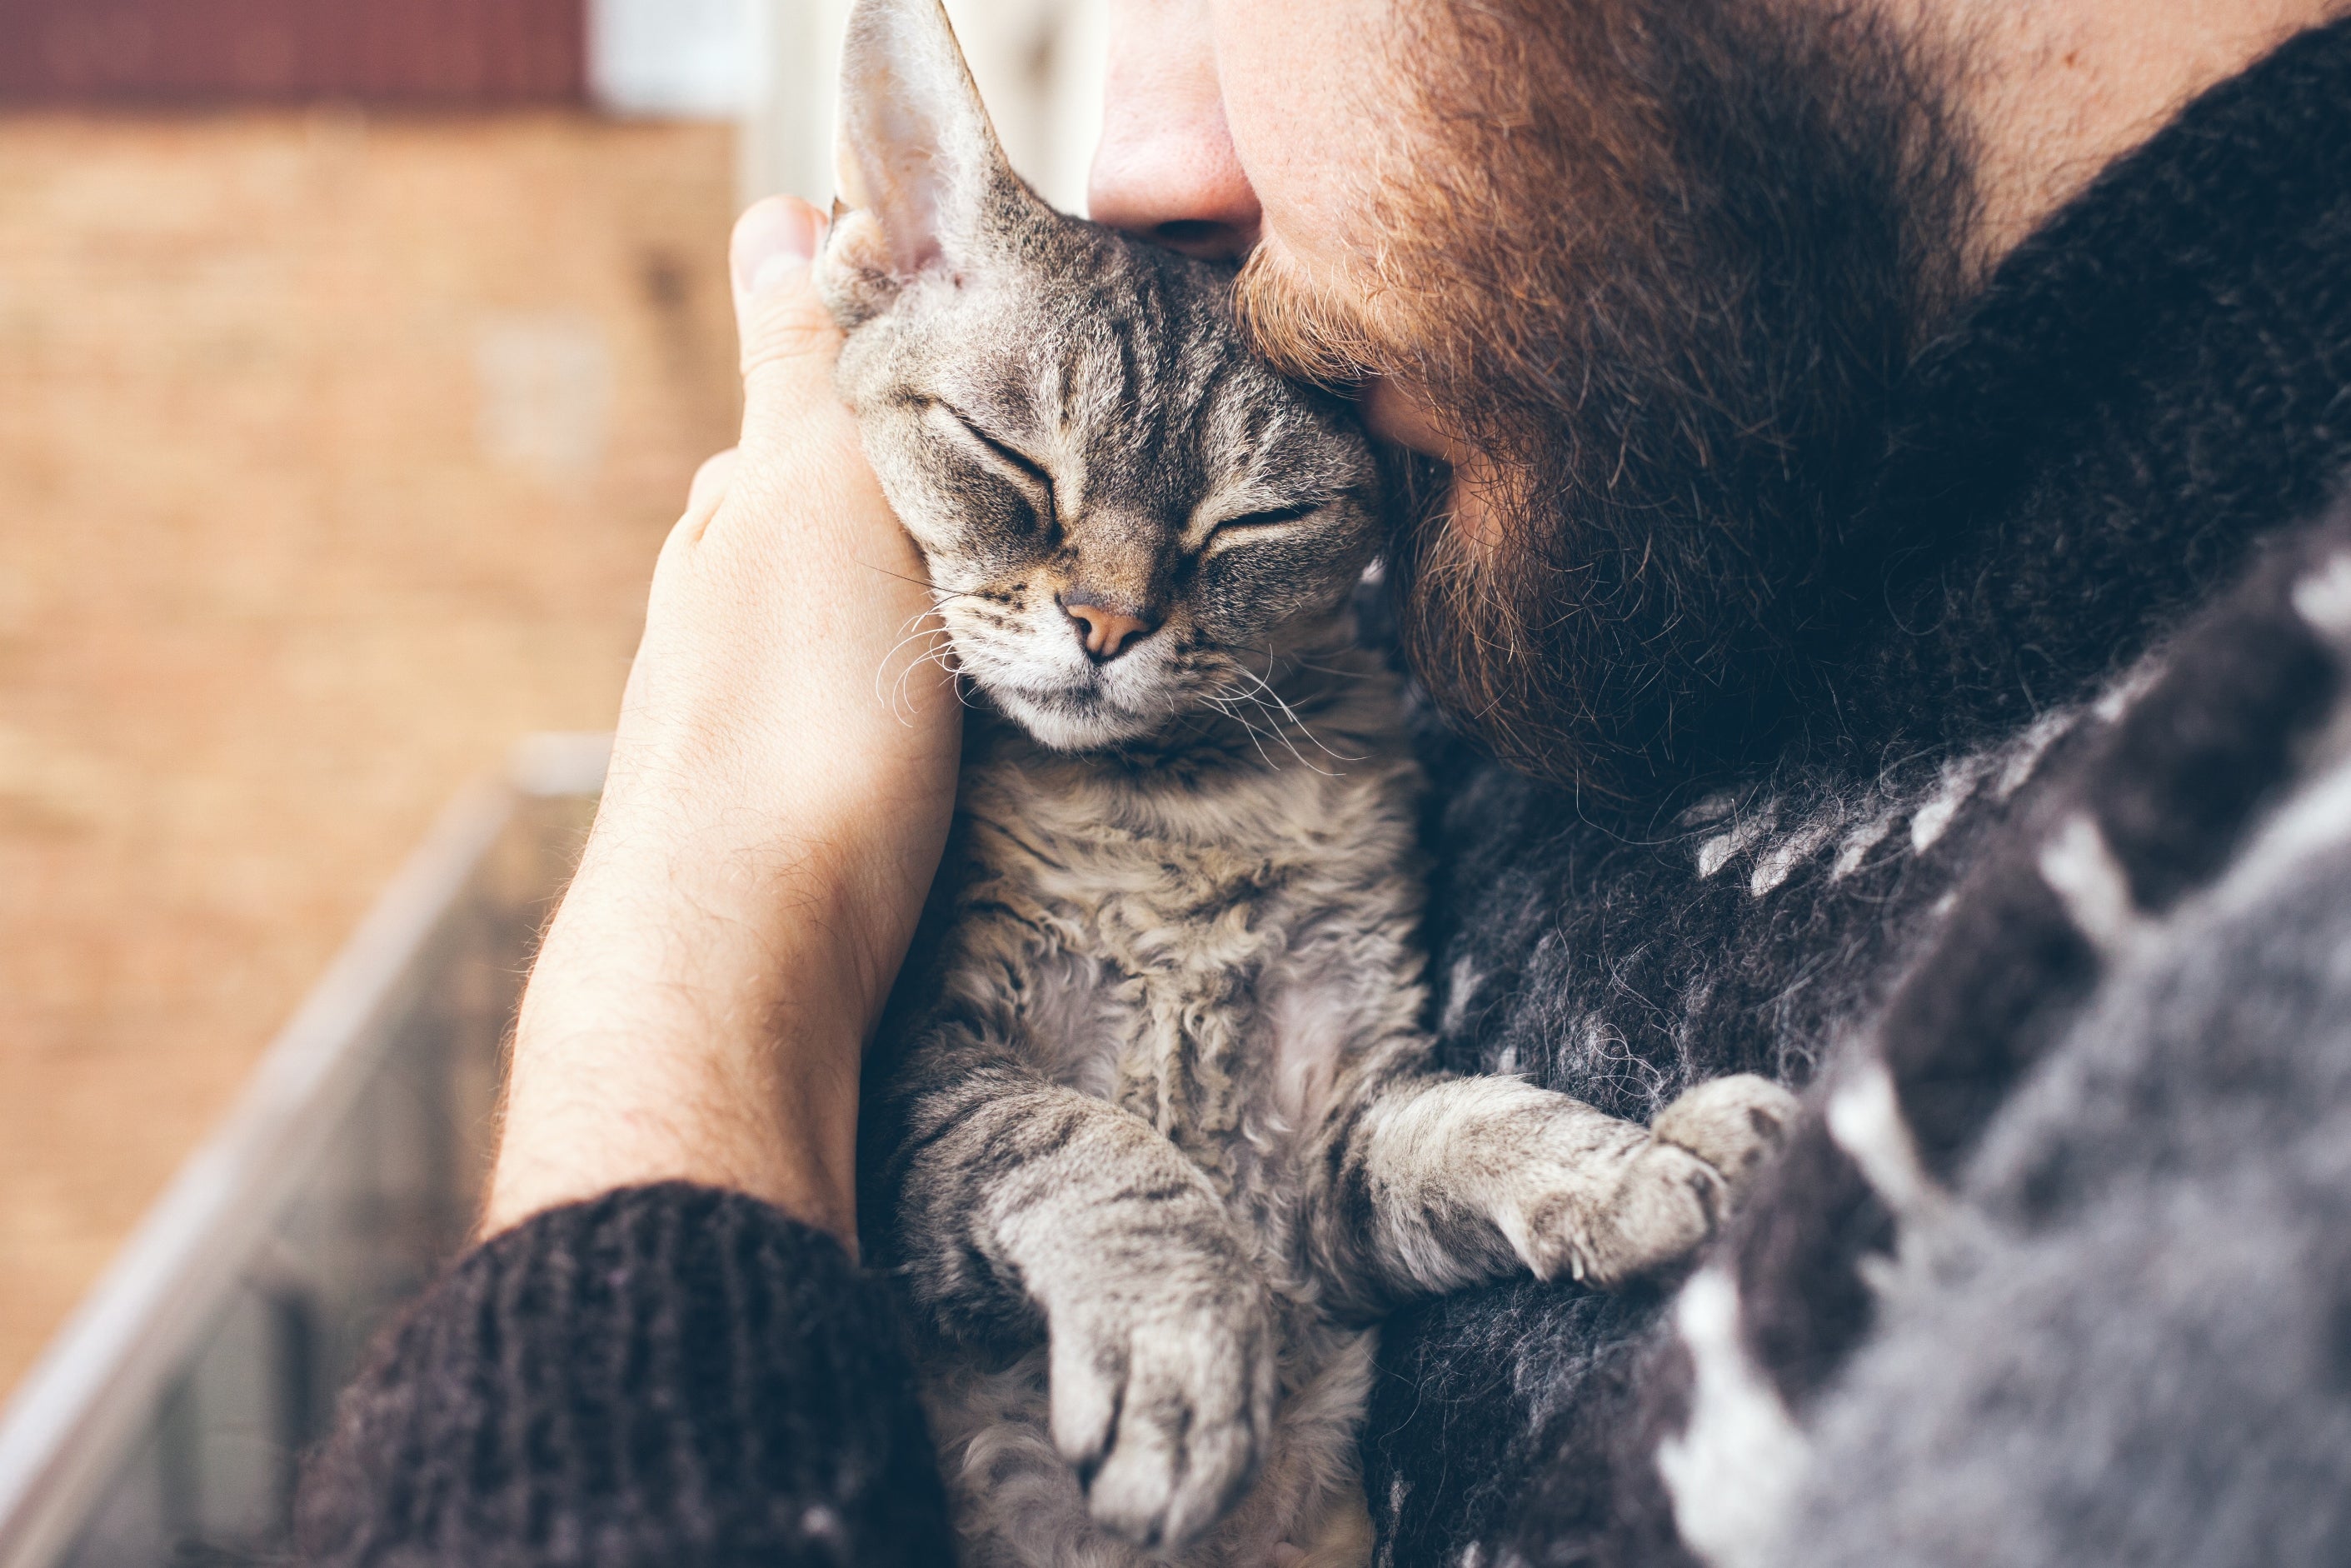 Choosing the best way to farewell your pet